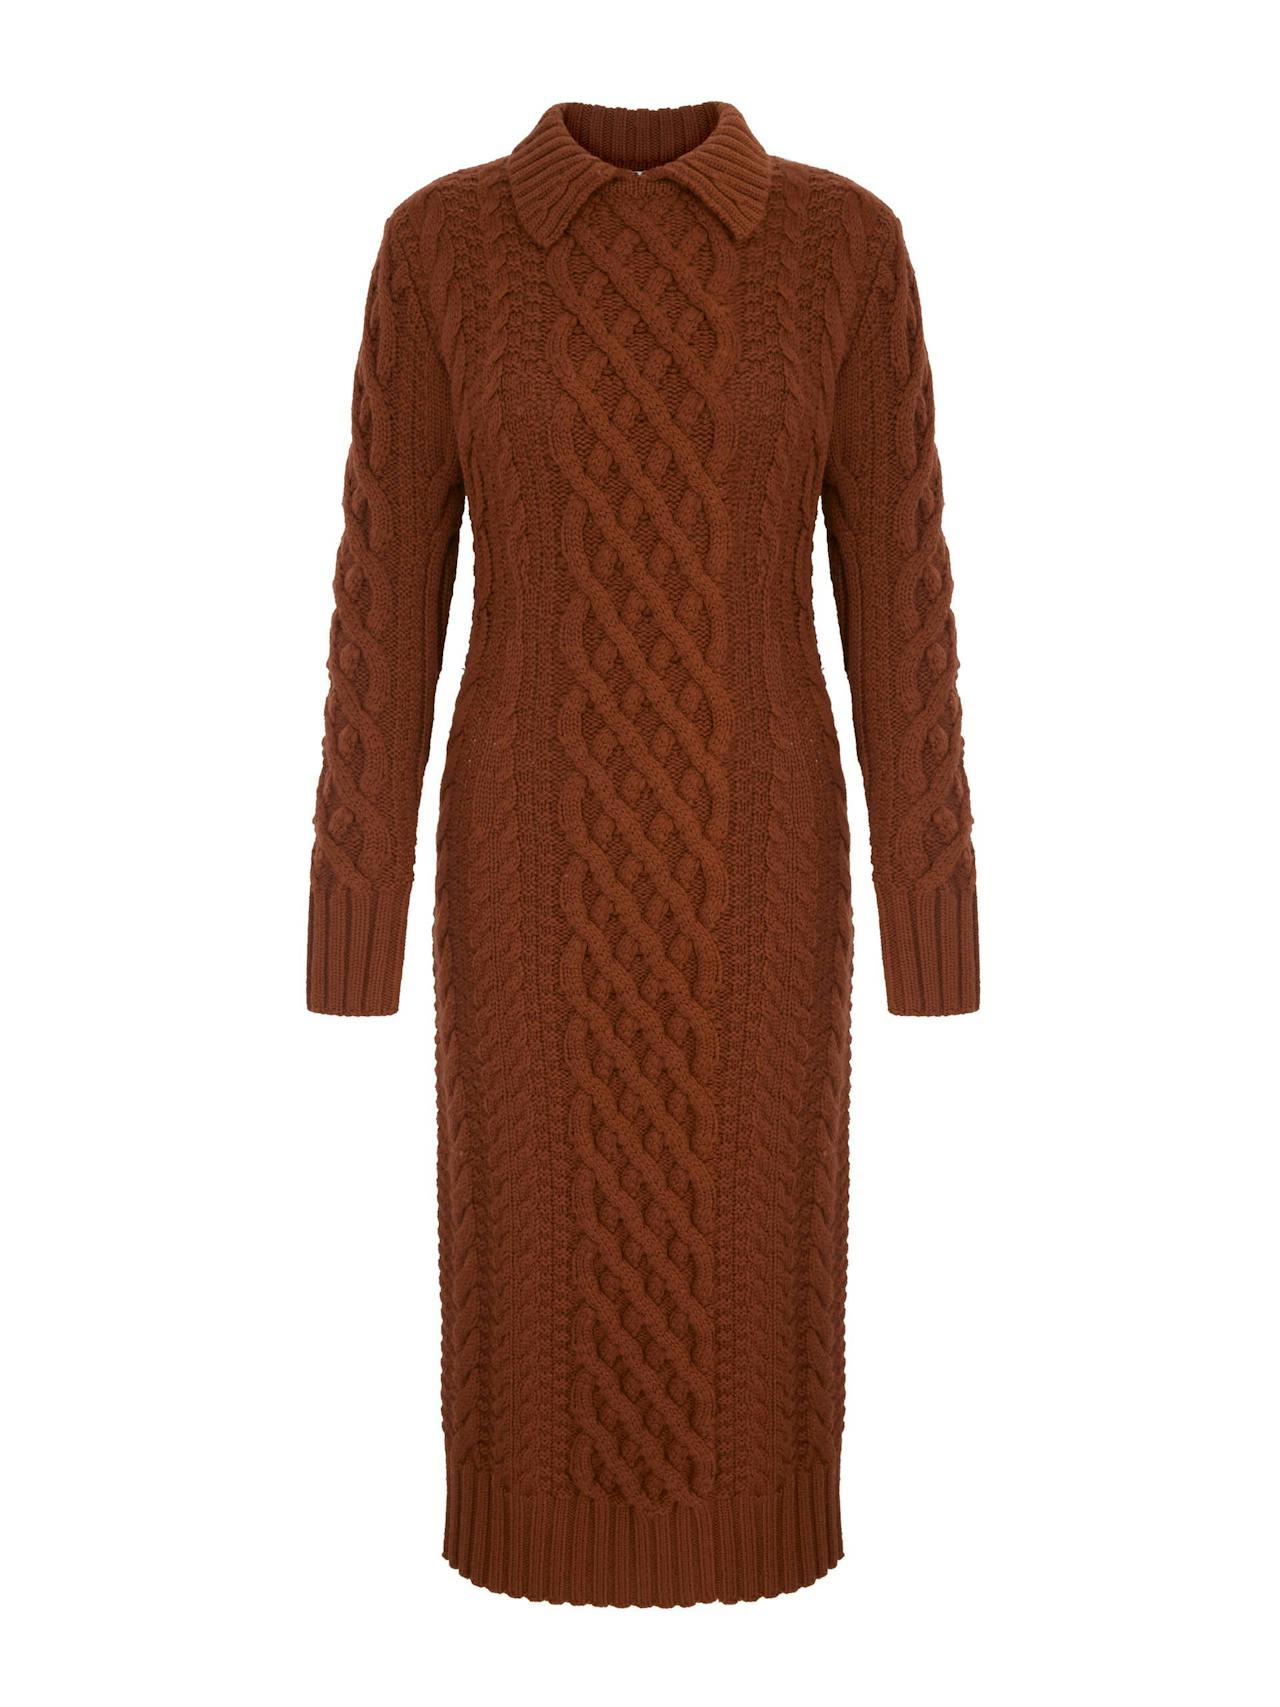 Zinny Amber Cashfeel Cable Knit Dress